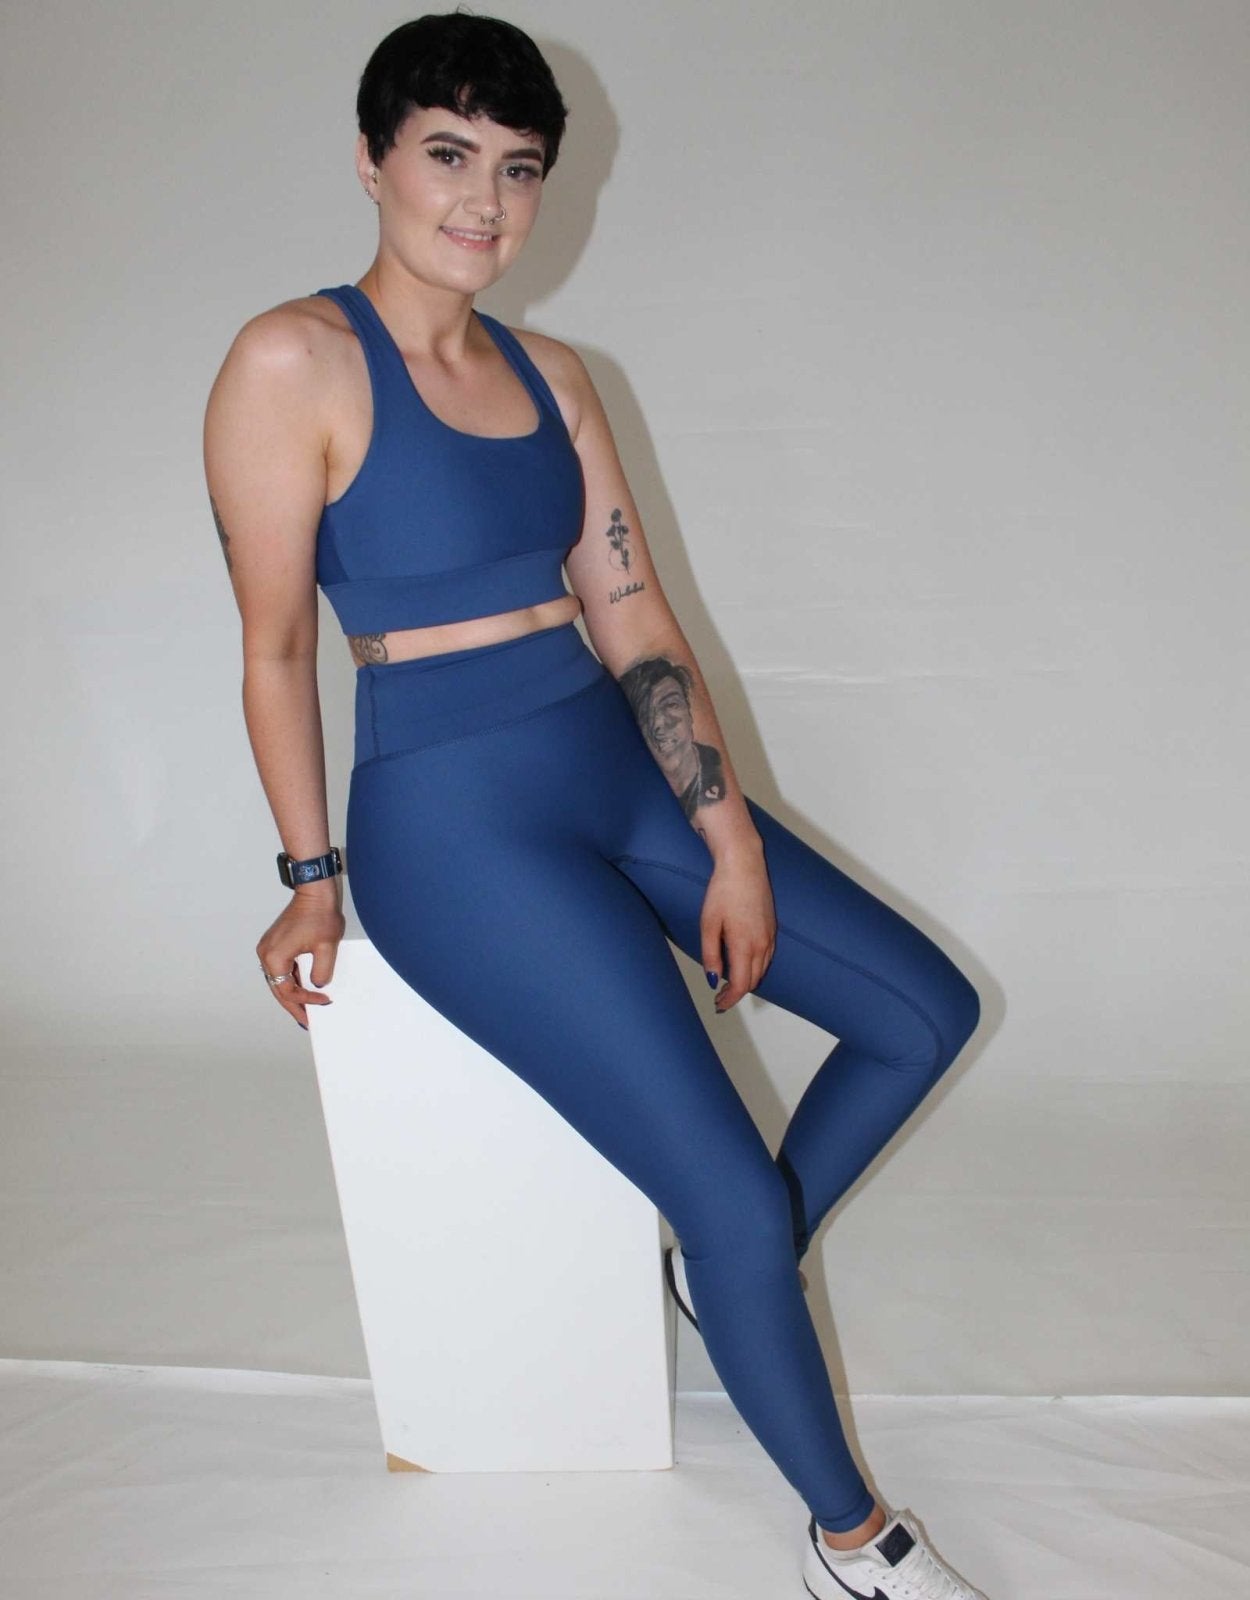 Girl resting against a white box. she is wearing blue activewear from vocus vit. She has leggings on and a sports bra. She has a tattoo on her arm. Vocus vit is a sustainable women's activewear brand that uses recycled materials and ethical manufacturing. Based in Northern Ireland. Shipping worldwide.Sizes XS (8) TO XXL (18).